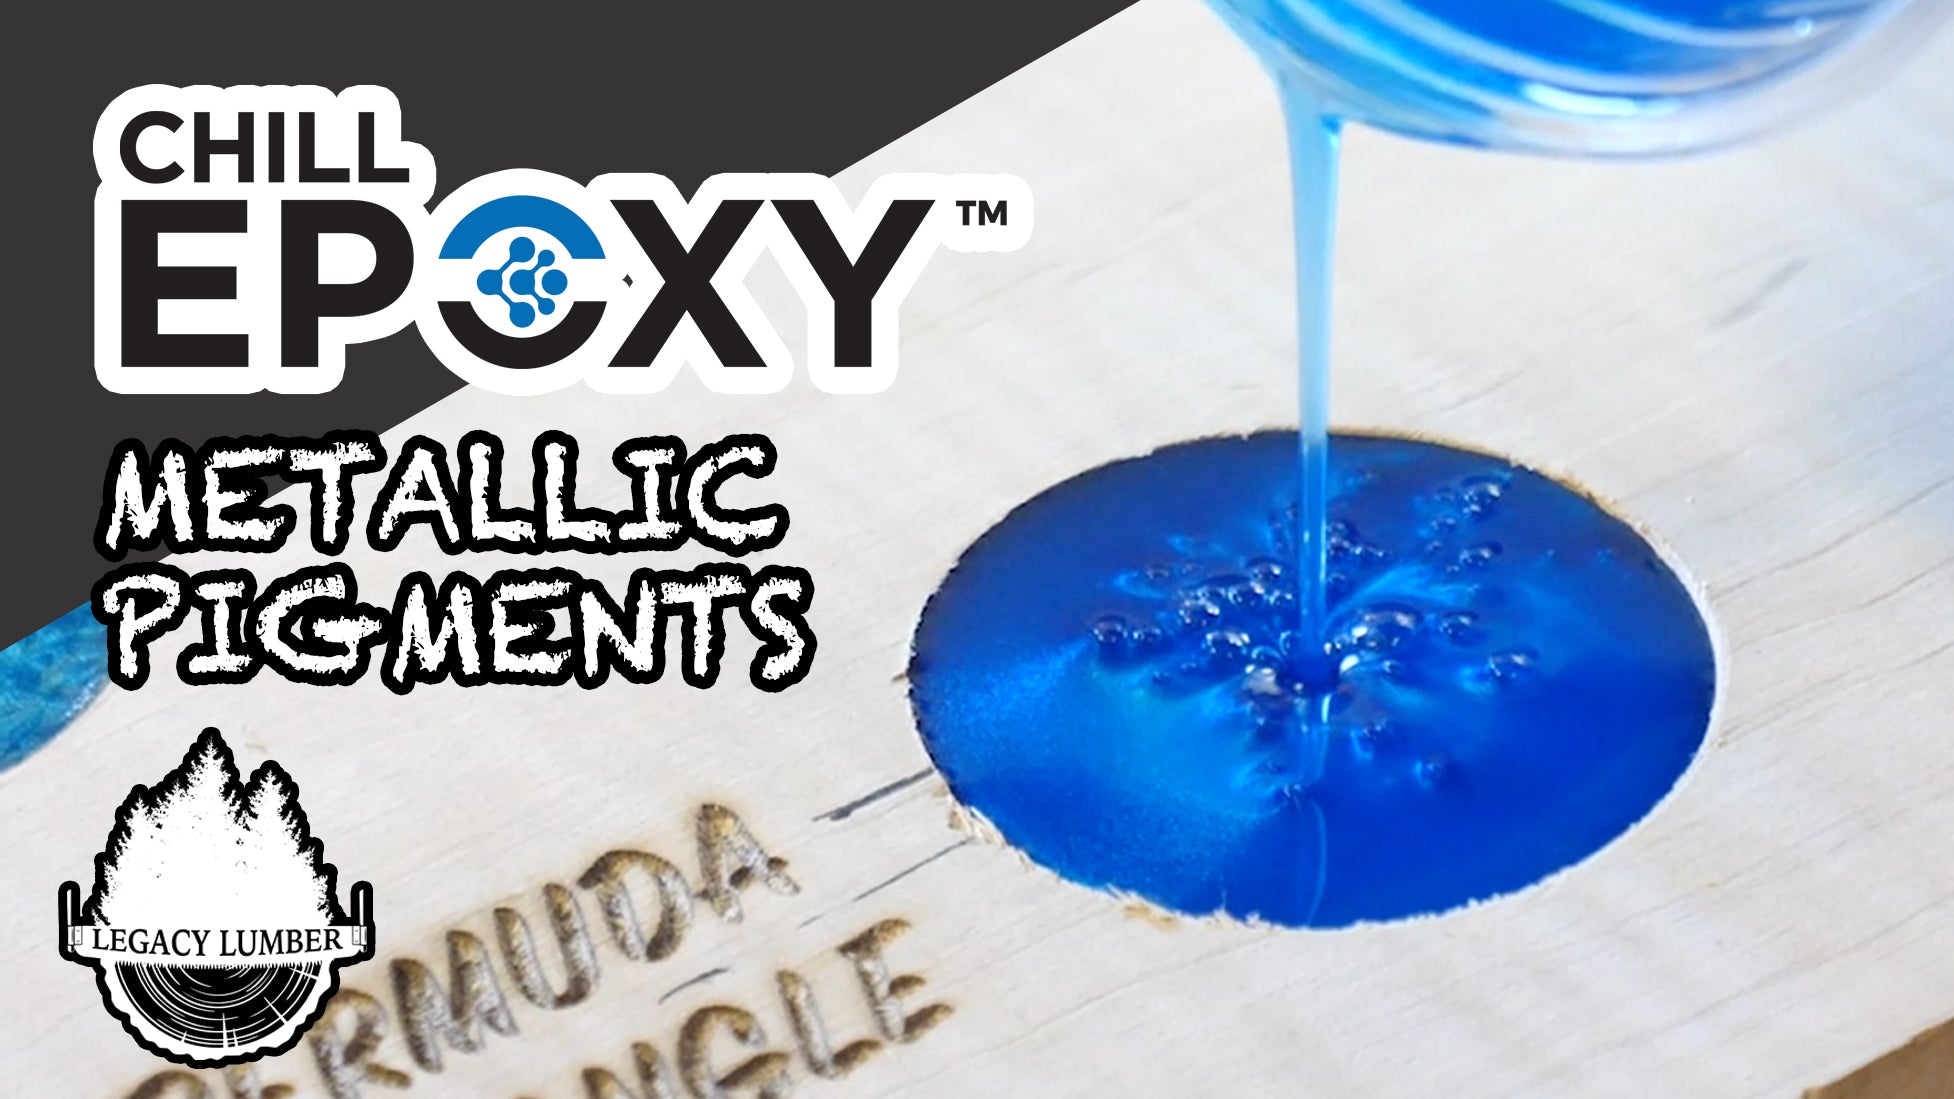 Check out the Chill Epoxy Metallic Pigments... VIDEO!